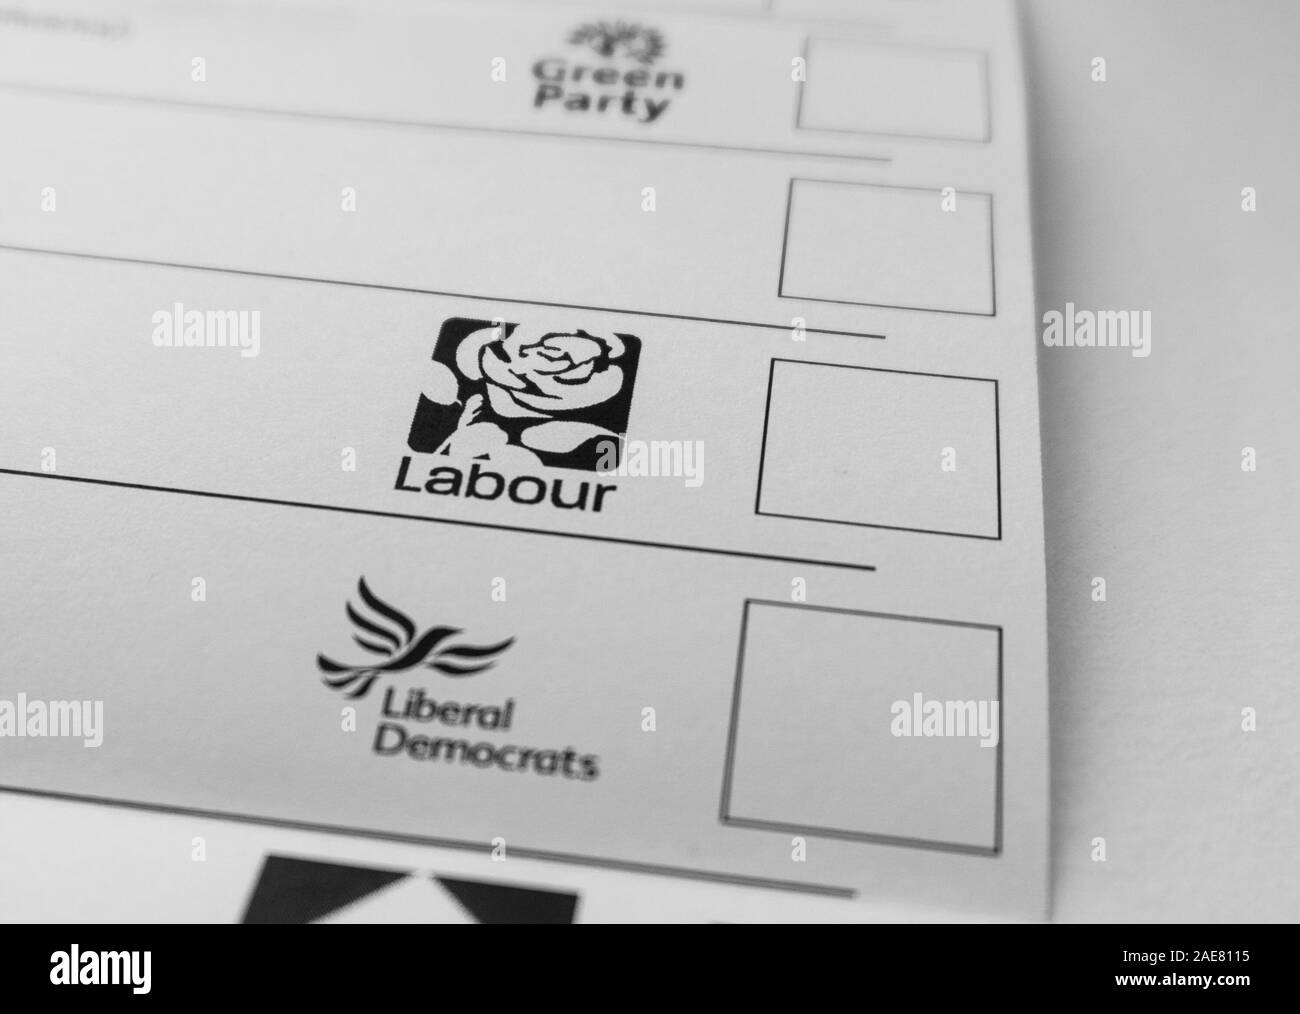 London / United Kingdom - December 7th 2019: General election ballot paper with green party, labour, libdem logos Stock Photo